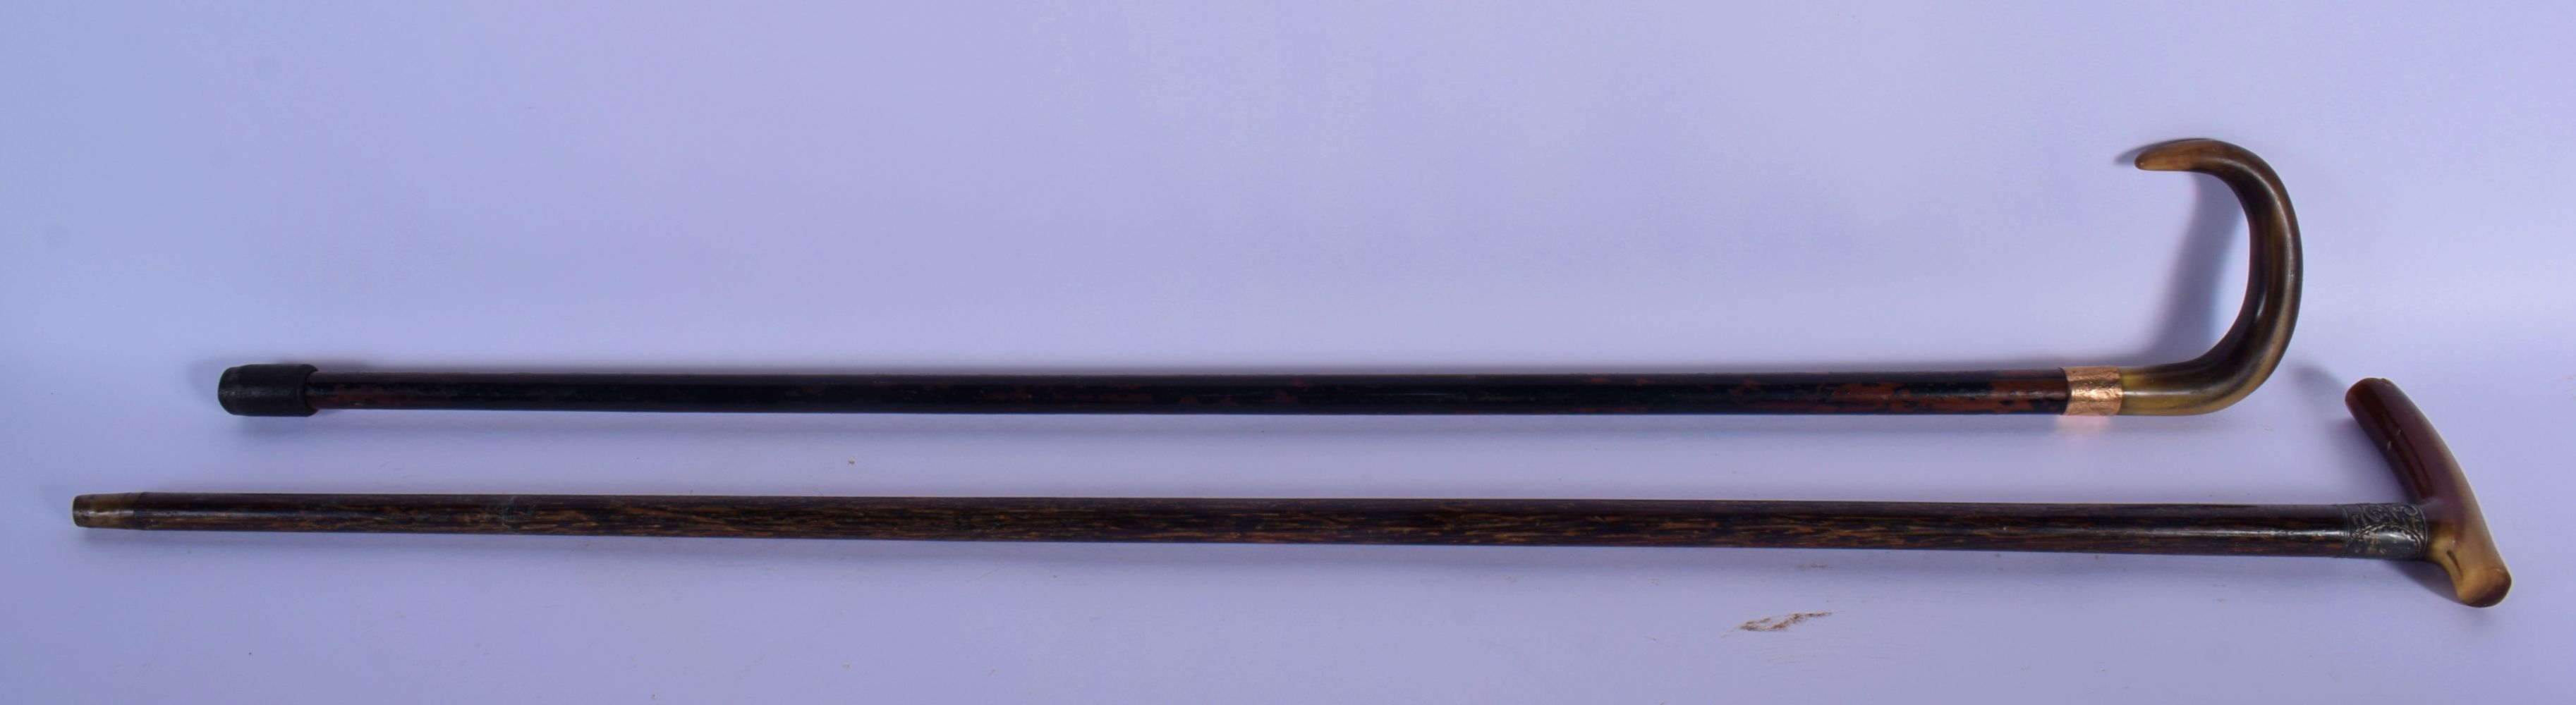 TWO 19TH CENTURY CONTINENTAL CARVED RHINOCEROS HORN WALKING CANES. 90 cm long. (2) - Image 3 of 3